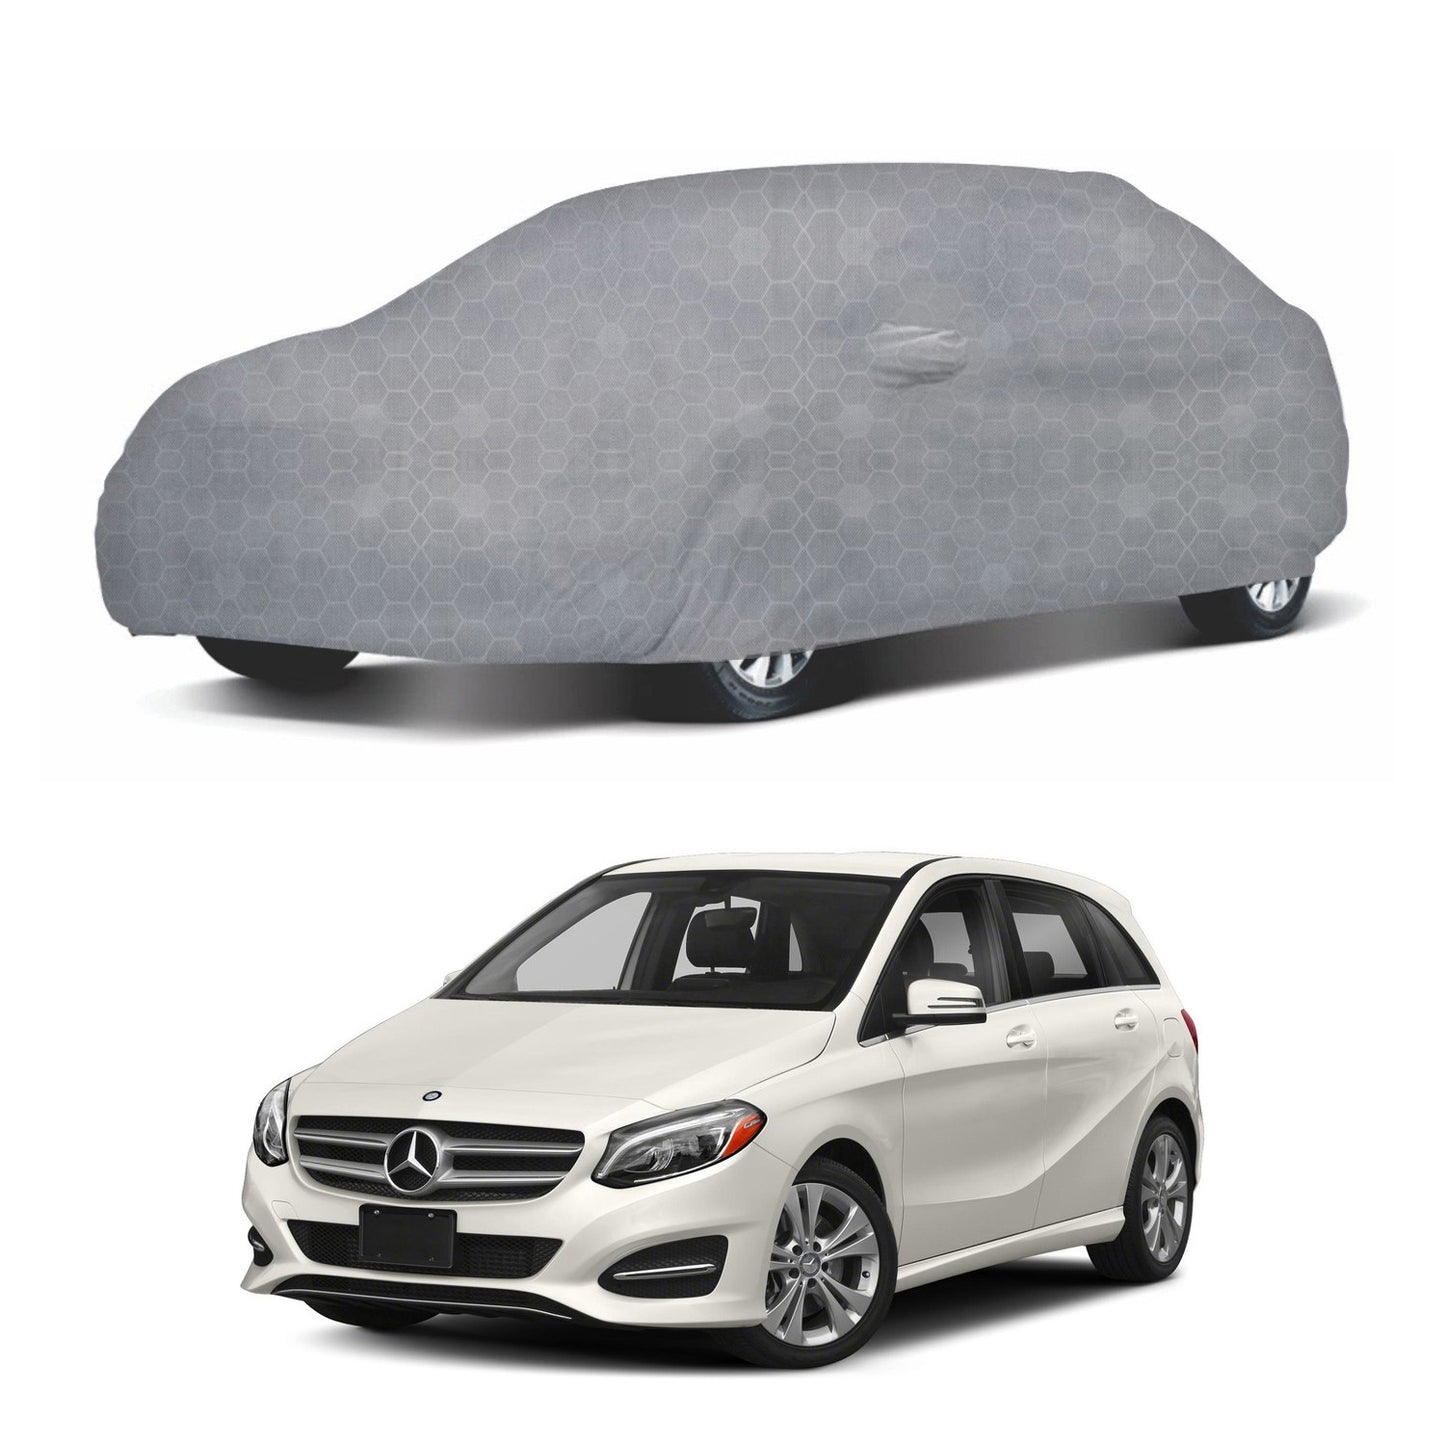 Oshotto 100% Dust Proof, Water Resistant Grey Car Body Cover with Mirror Pocket For Mercedes Benz B-Class